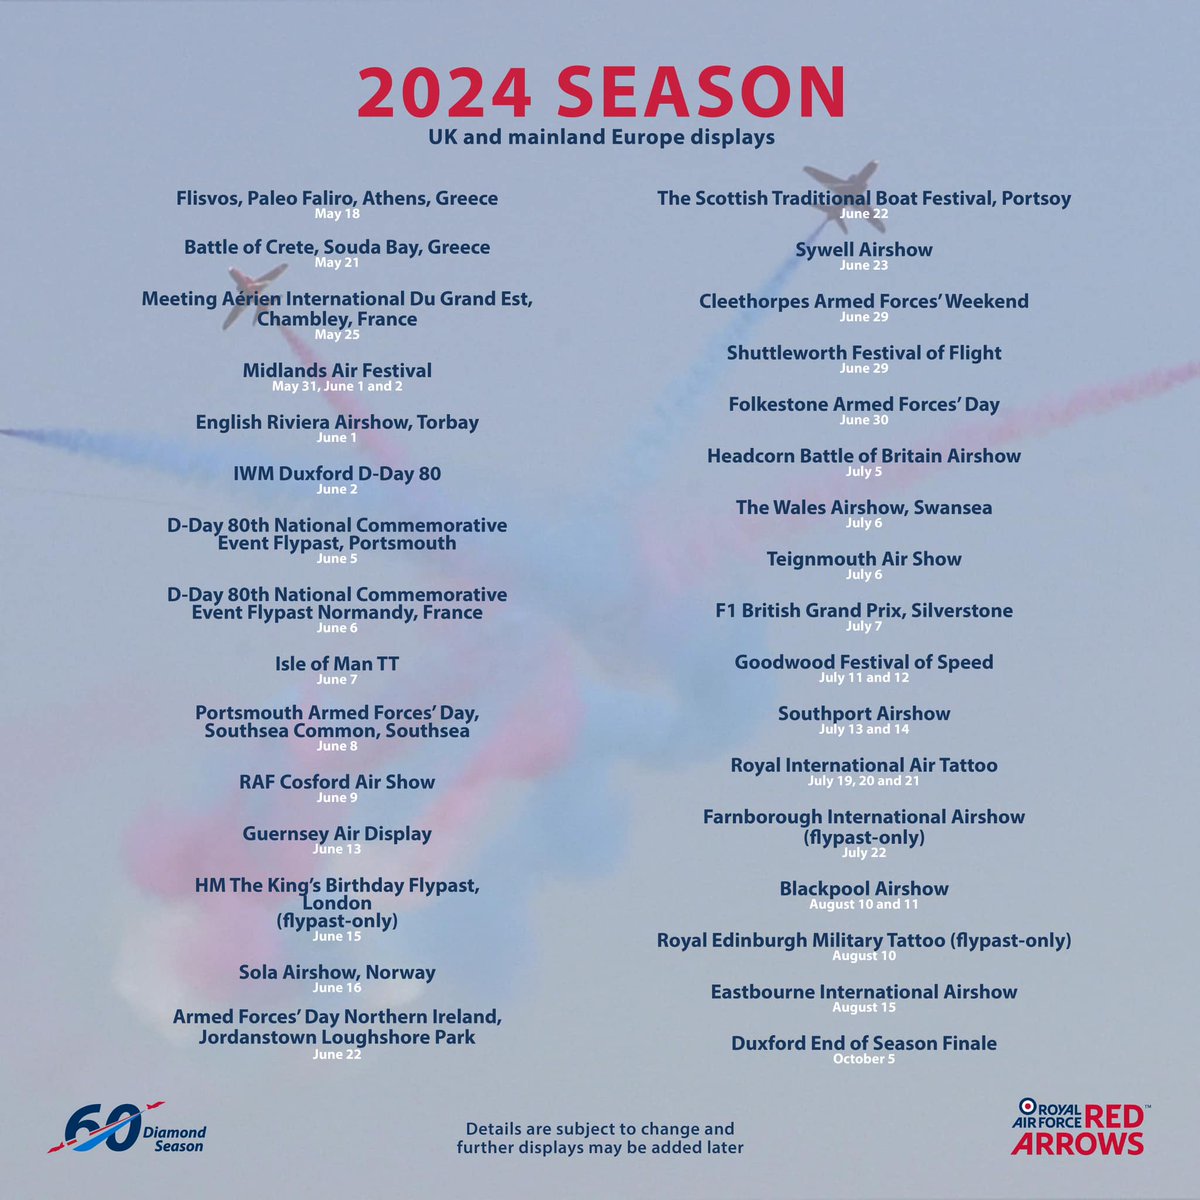 Royal Air Force Where to see the Red Arrows in the UK and mainland Europe in 2024 - 60th season display dates. #RedArrows